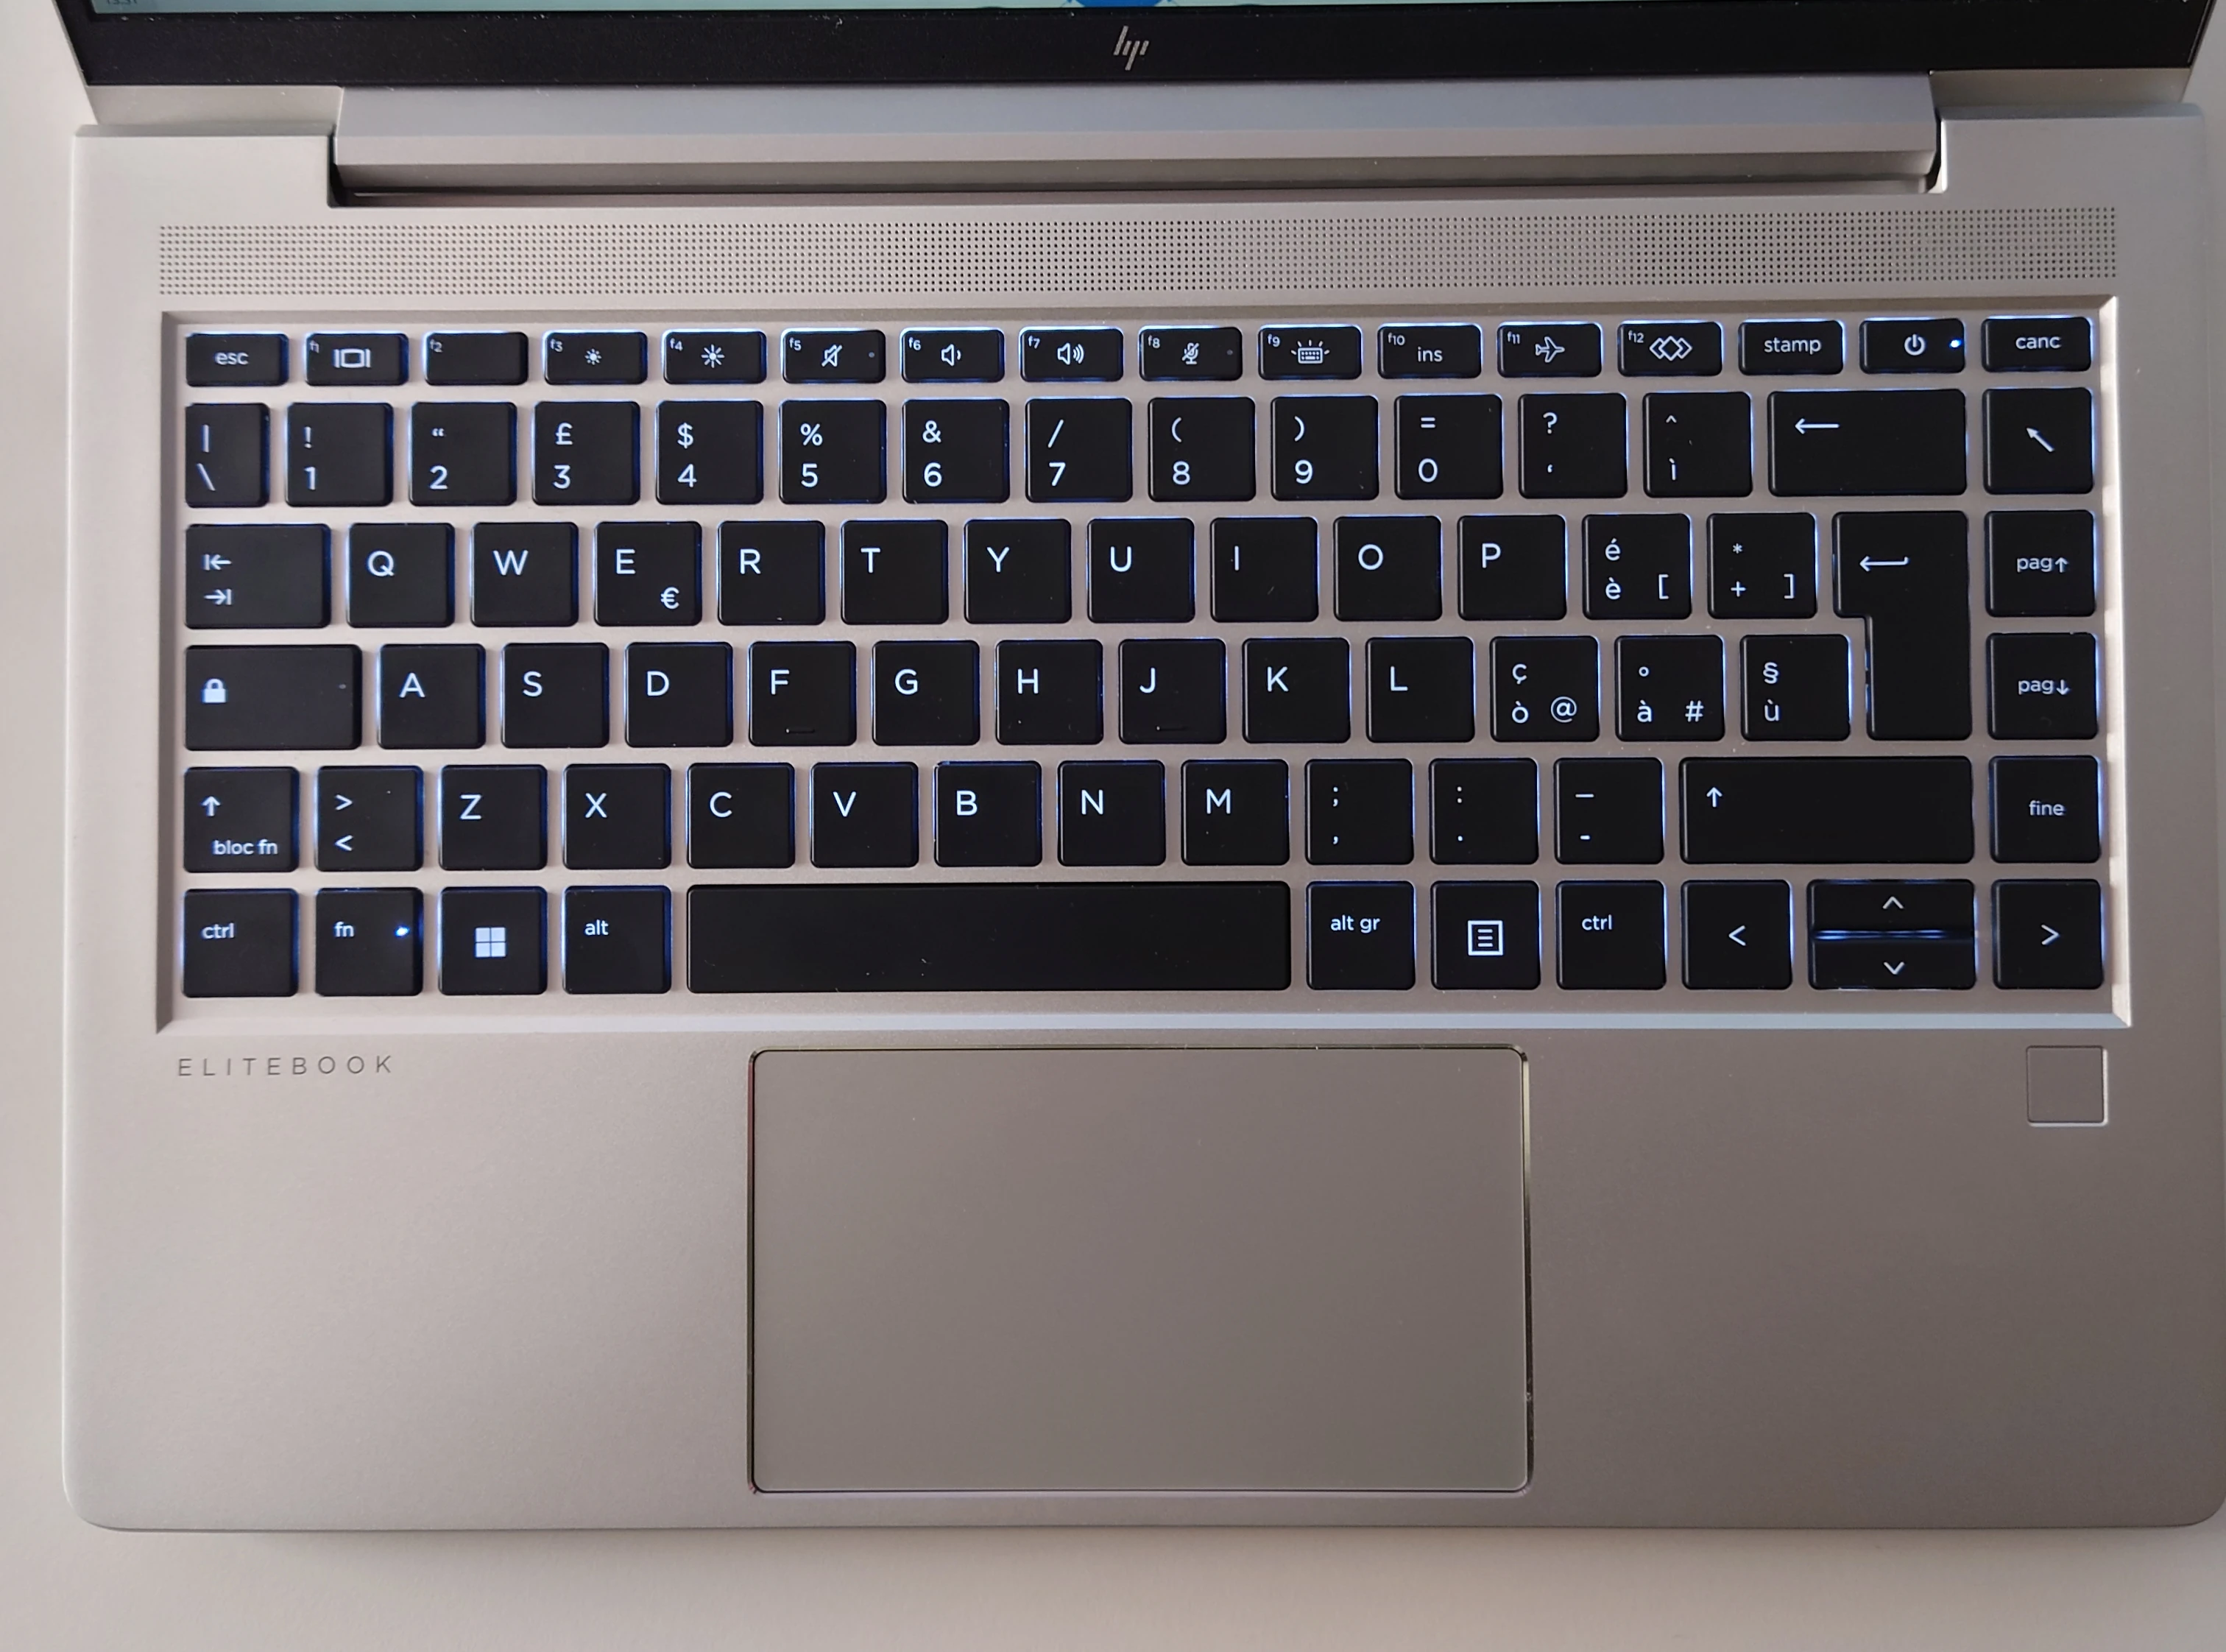 Keyboard and touchpad on the HP Elitebook 645 G9 laptop